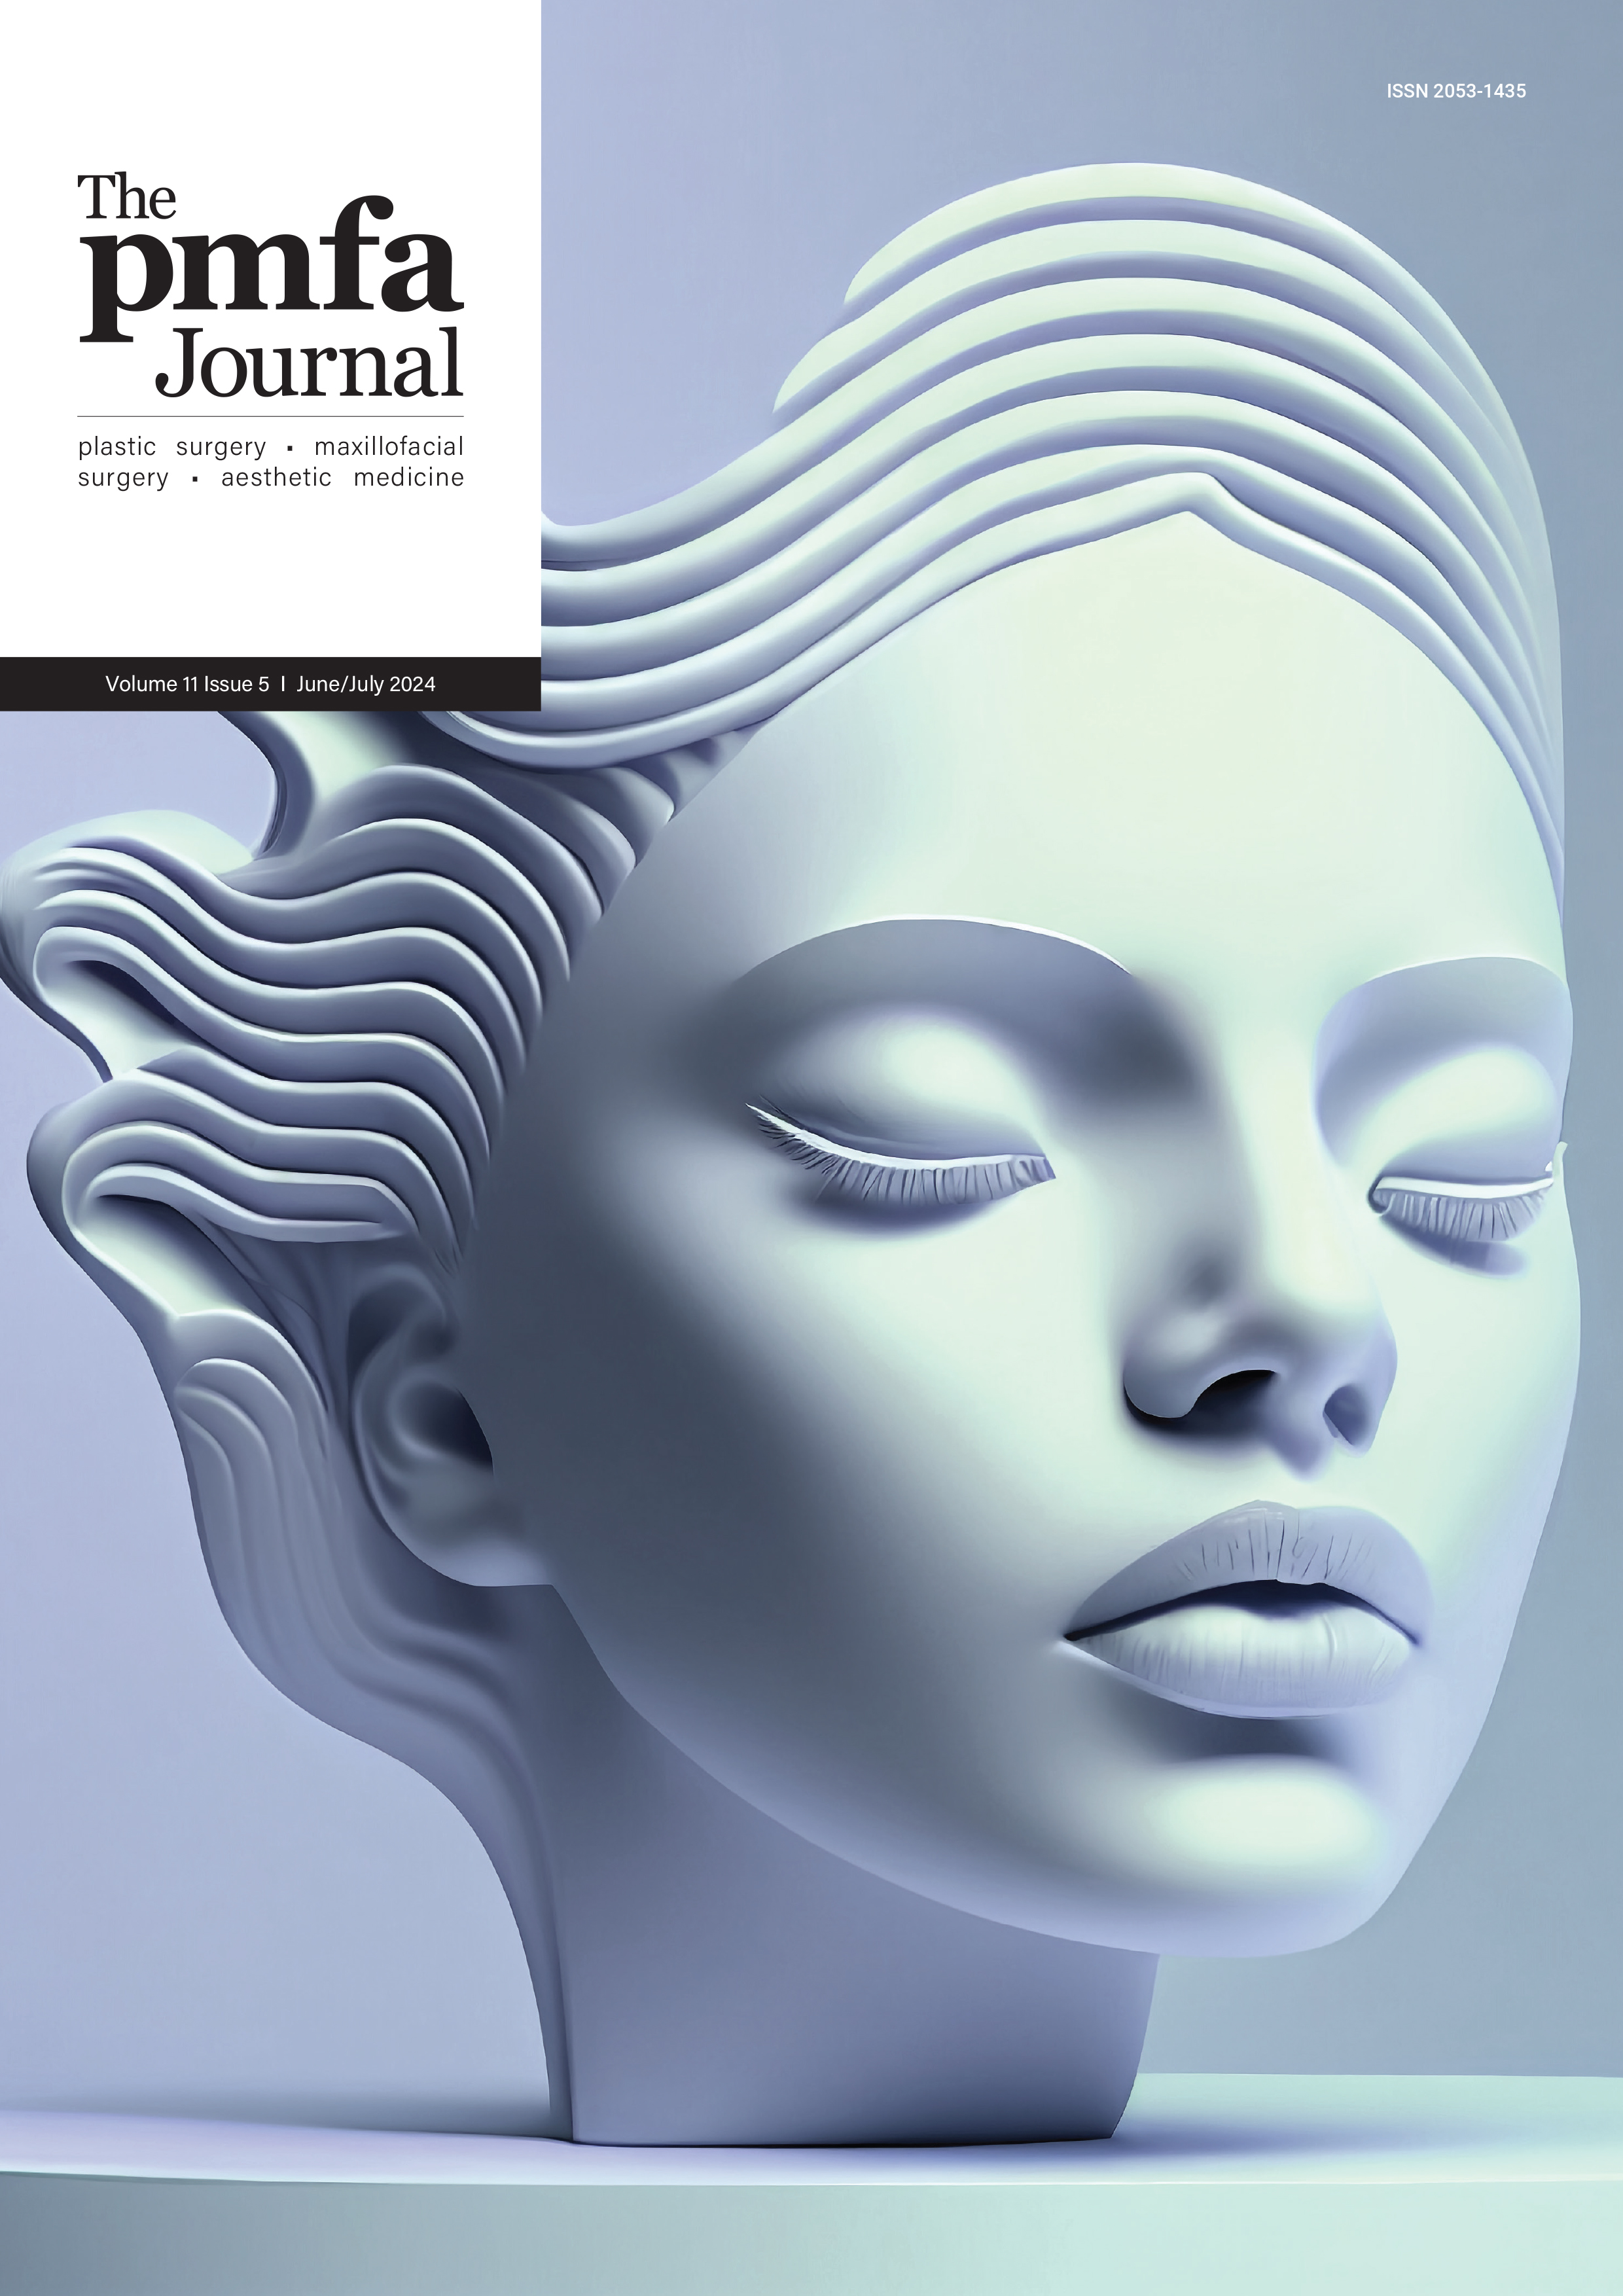 Complimentary subscription to The PMFA Journal for all BAPRAS members